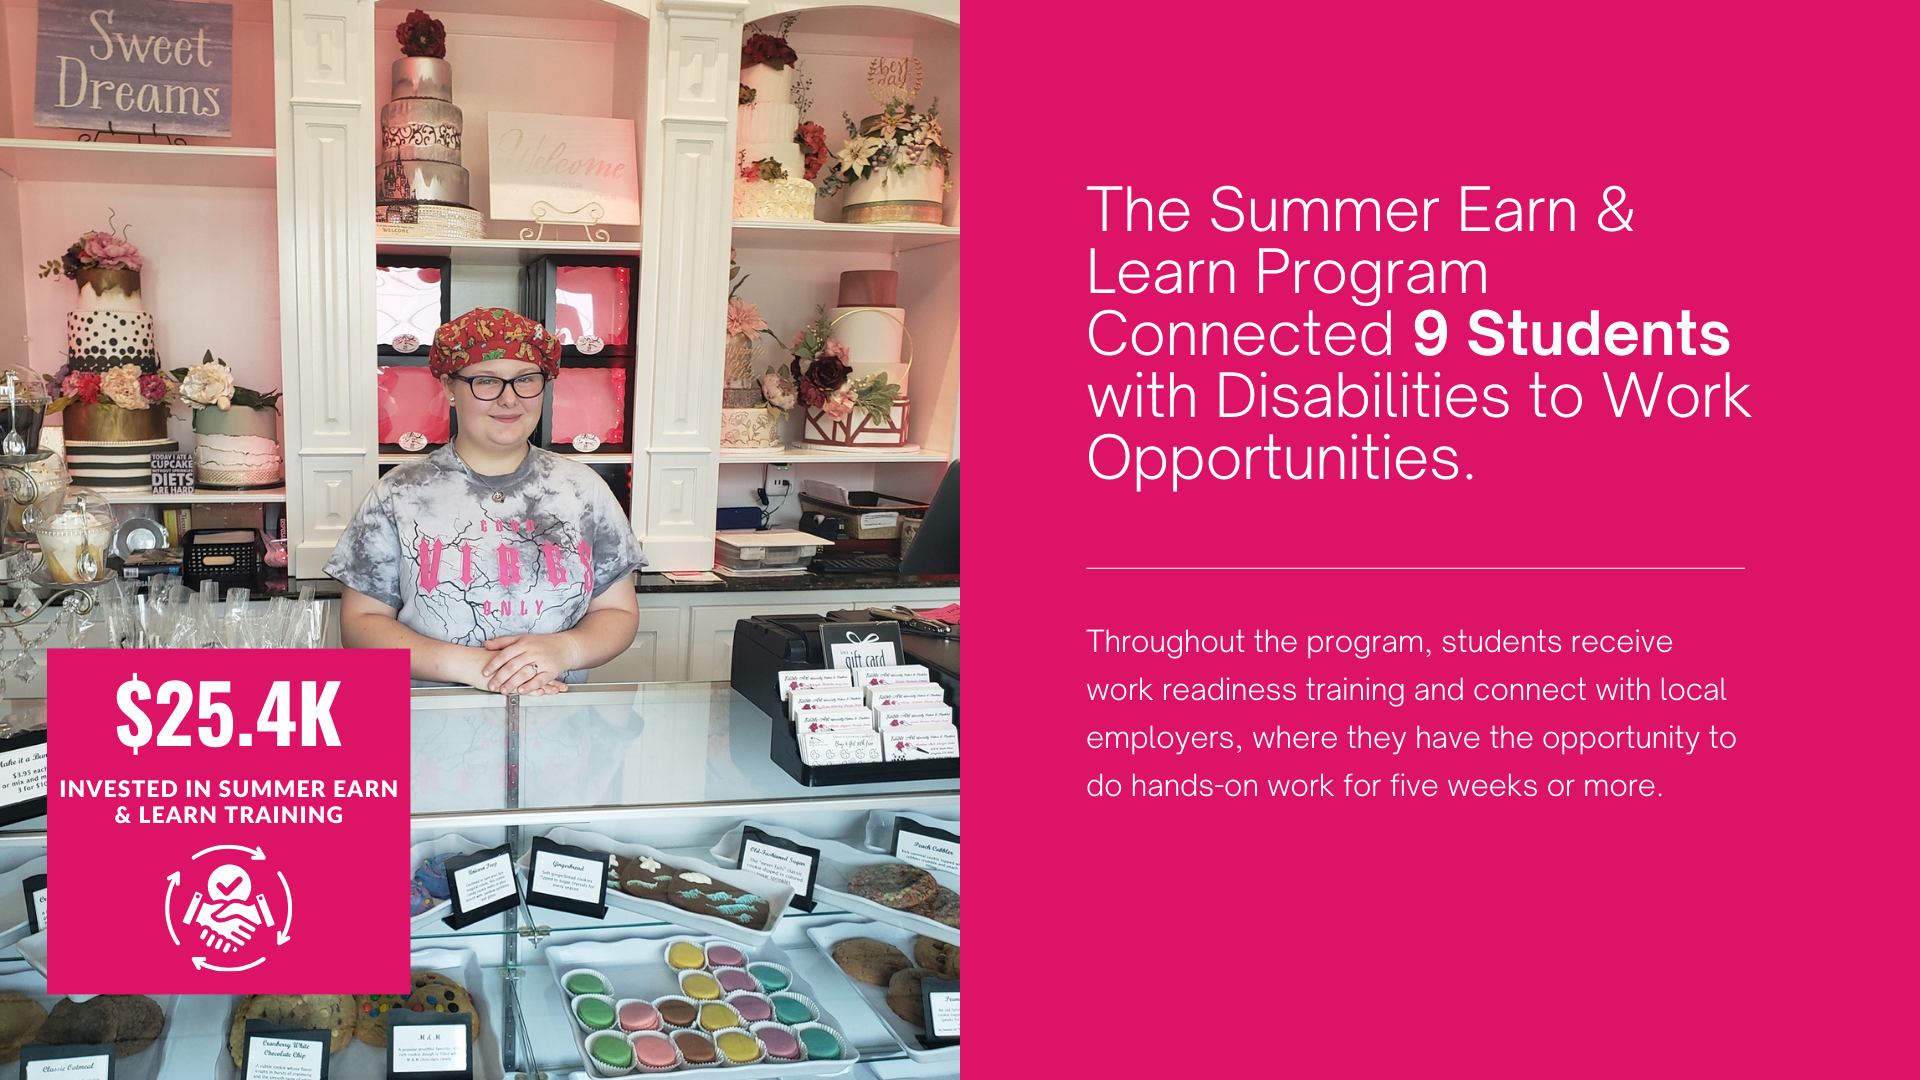 The summer earn and learn program connected 9 students with disabilities to work opportunities